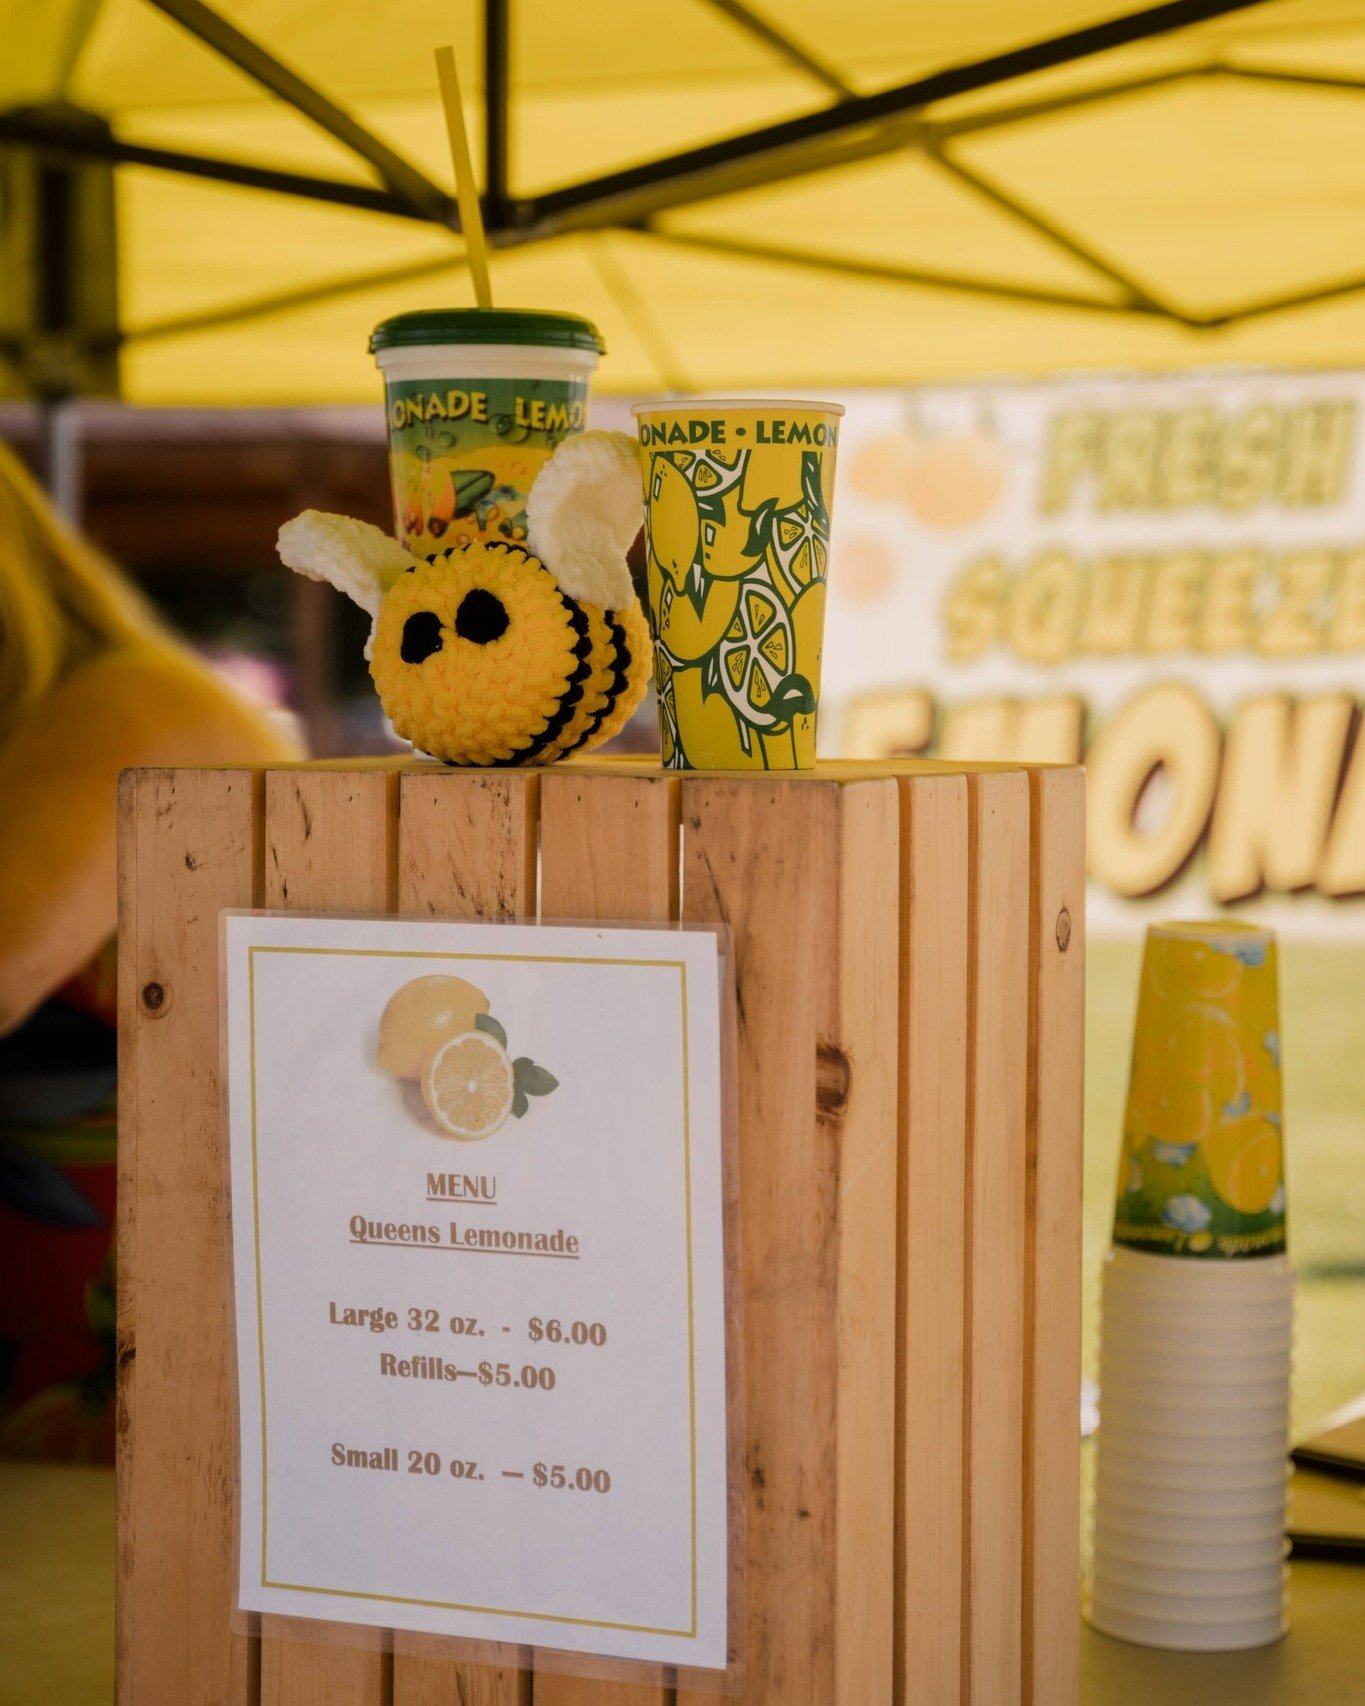 Can you BEElieve that the Summer Farmer's Market season is only ONE WEEK AWAY!? 🐝
Right in the heart of Rome, the summer season runs every Friday from May 17-September 27 from 9 AM-1 PM. If you're looking for sweet treats, cool craft items, or anyth